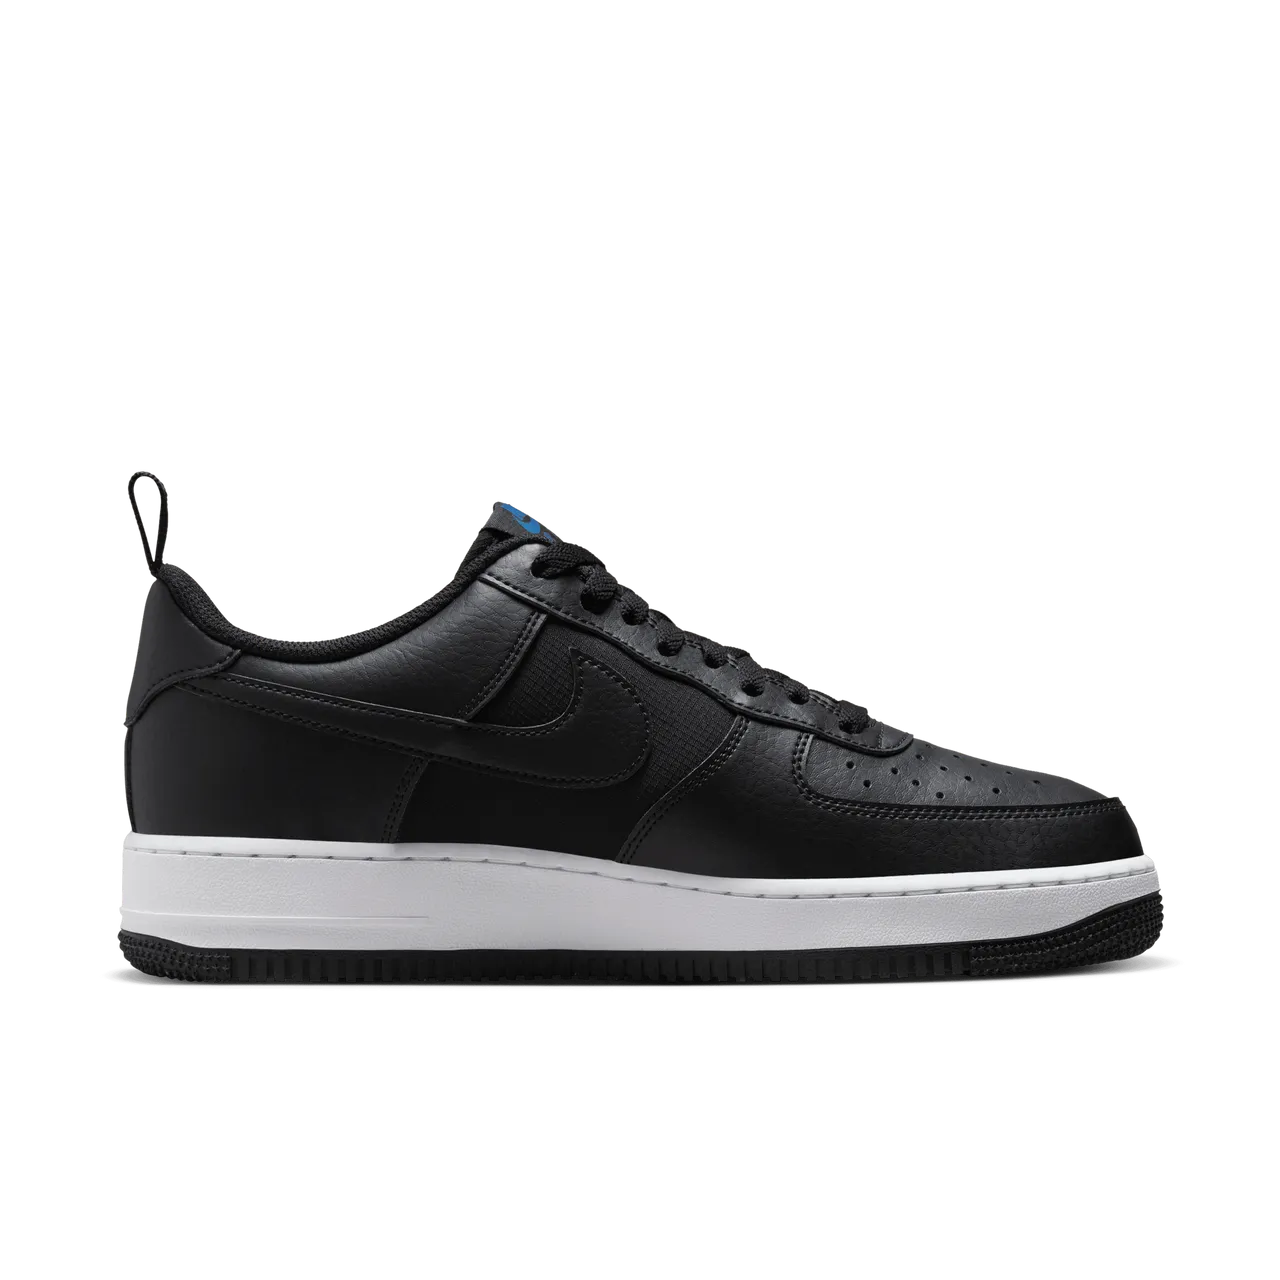 Nike Air Force 1 '07 Men's Shoes - Black - Leather